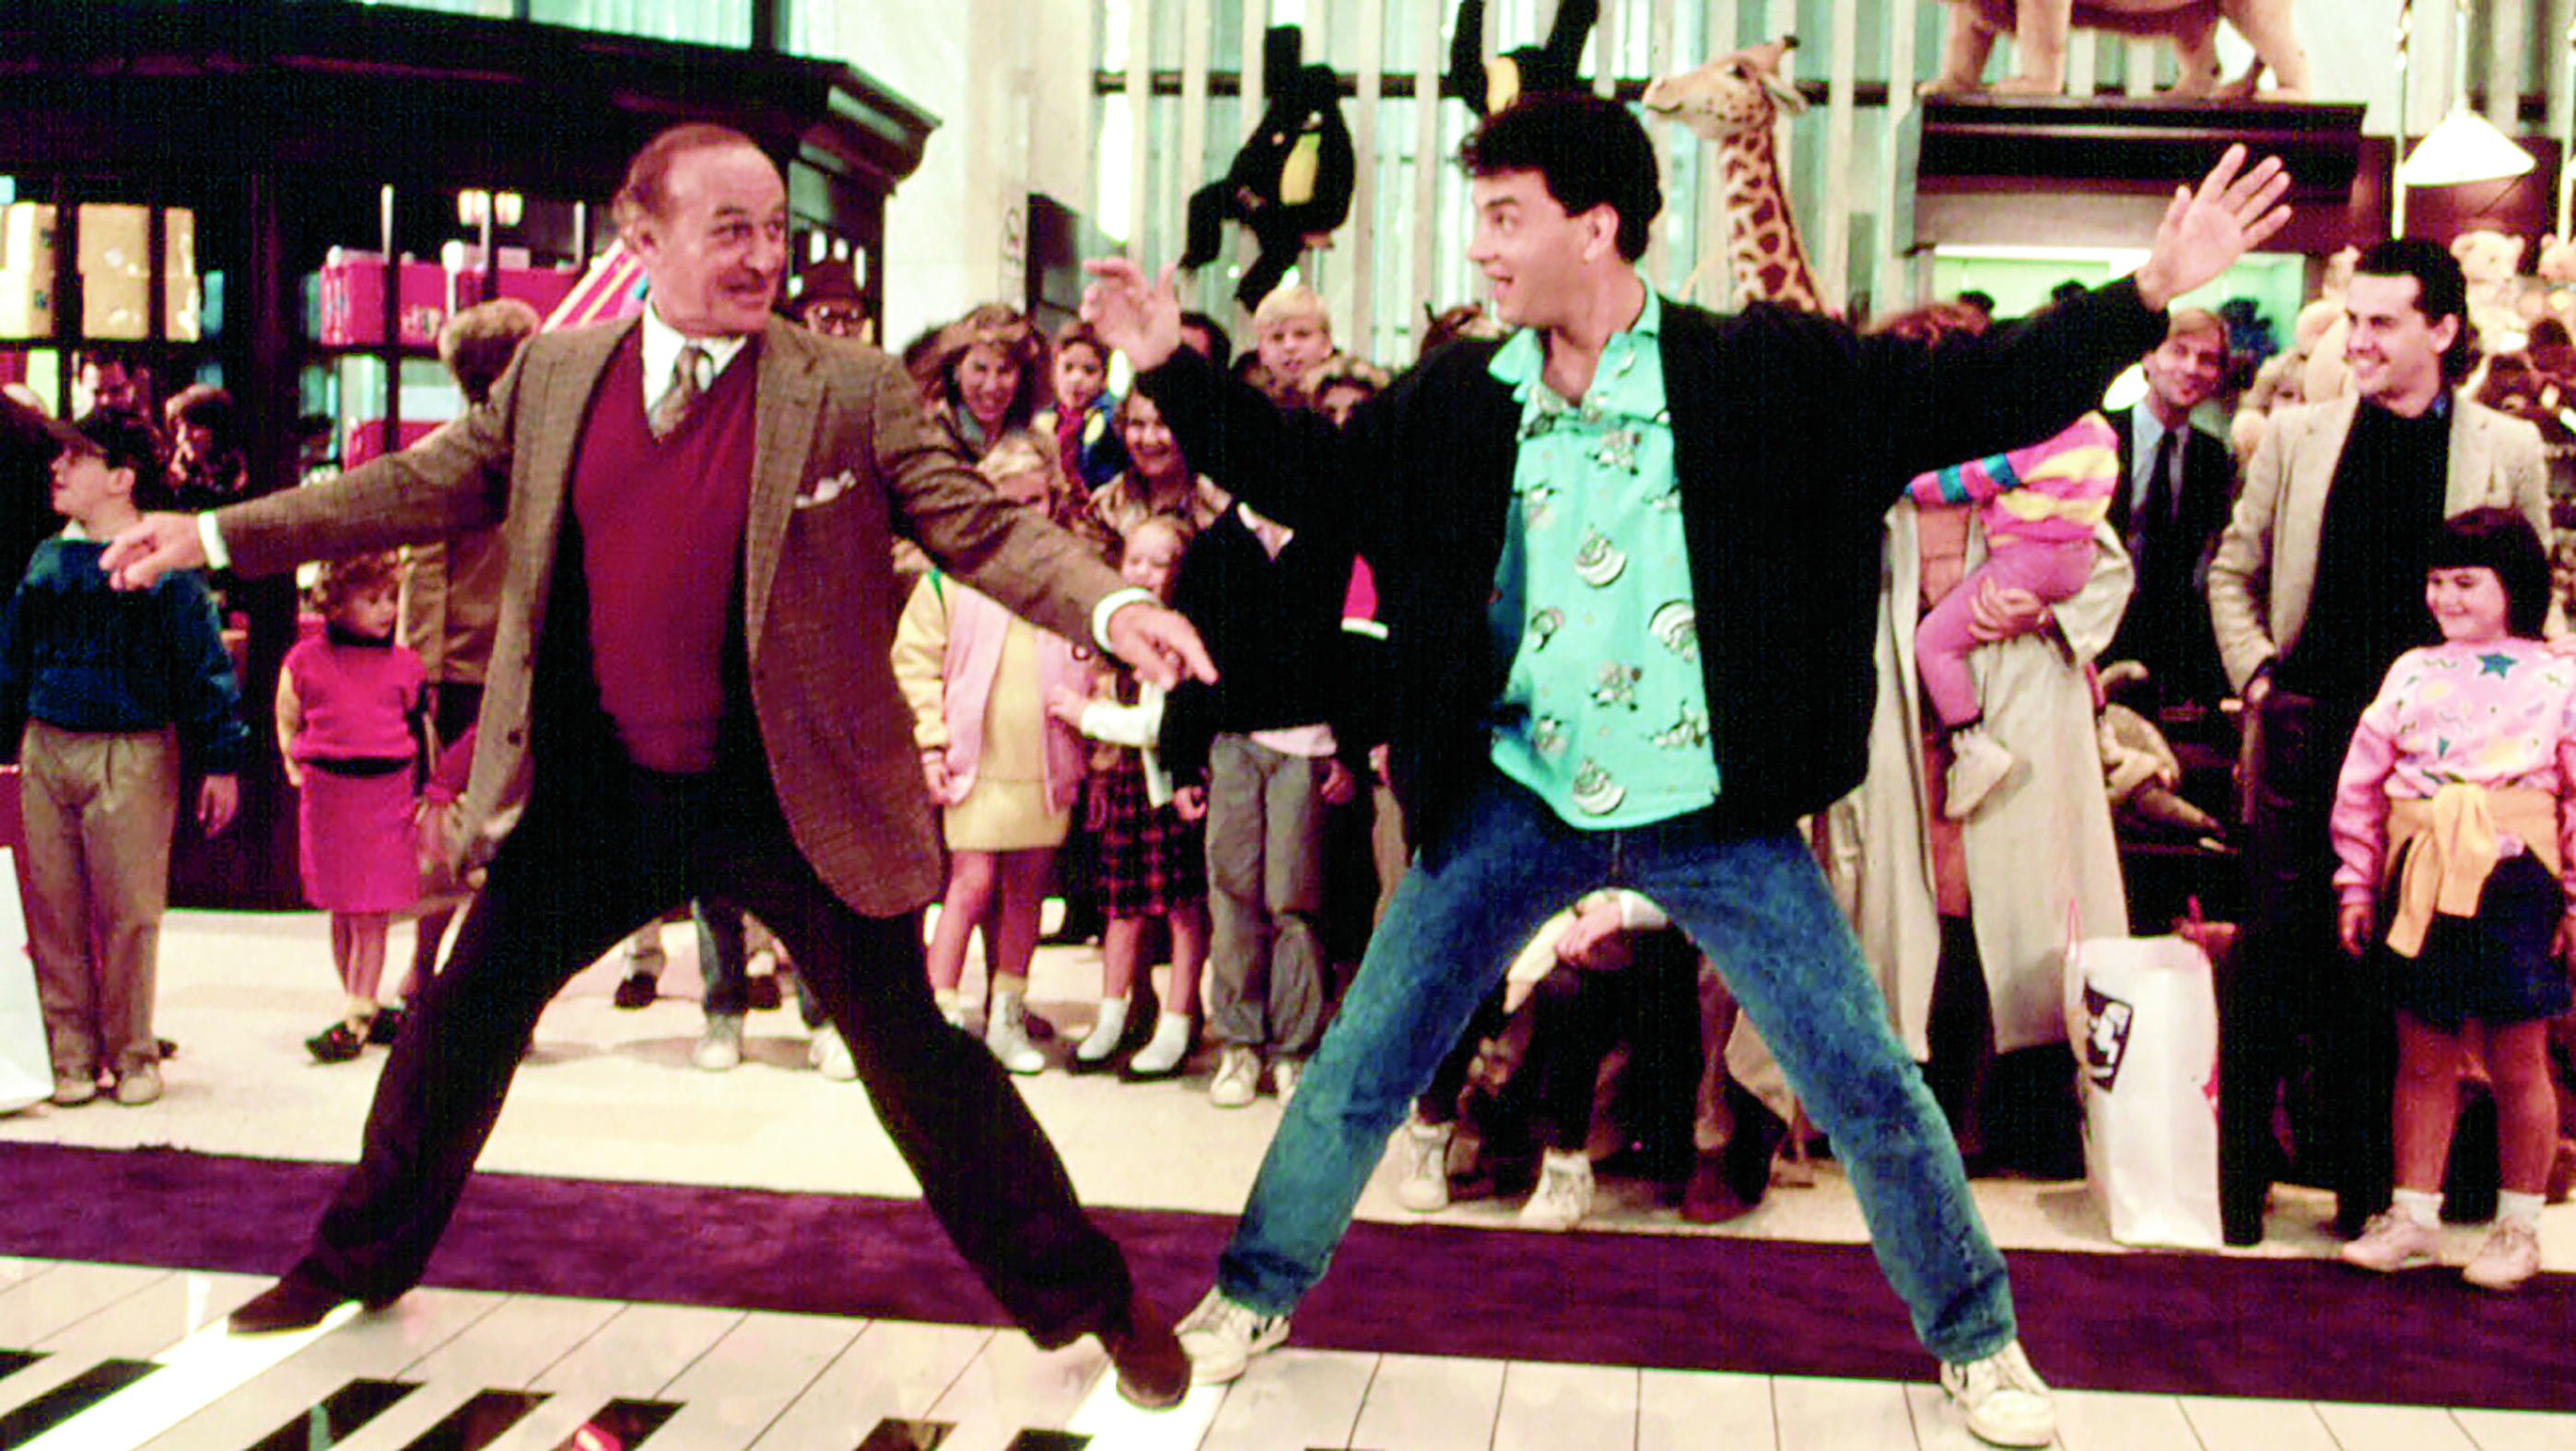 BIG, Robert Loggia, Tom Hanks, 1988. TM and Copyright (c) 20th Century Fox Film Corp. All rights reserved. Courtesy: Everett Collection.